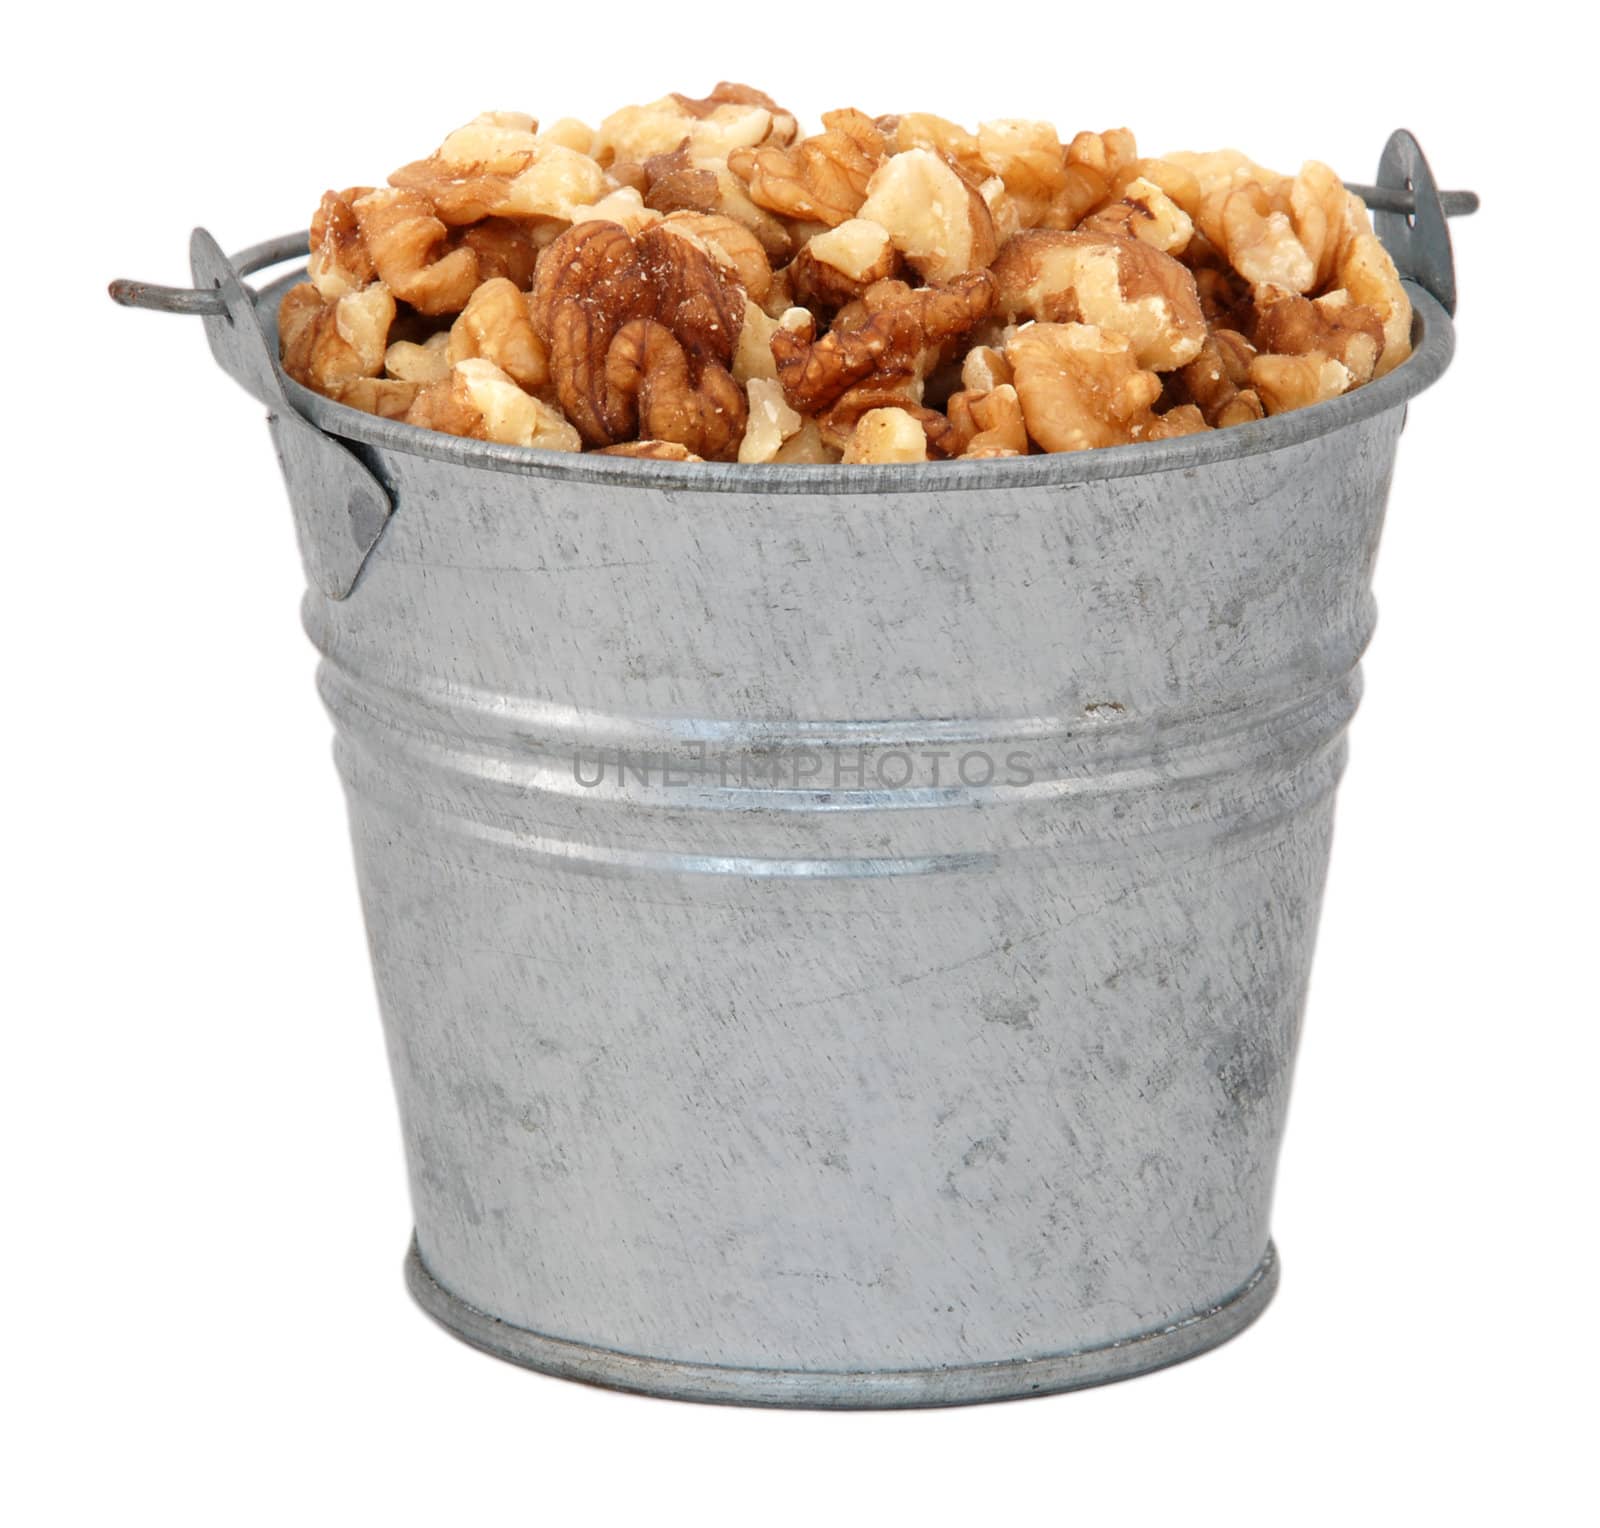 Chopped walnuts in a miniature metal bucket, isolated on a white background